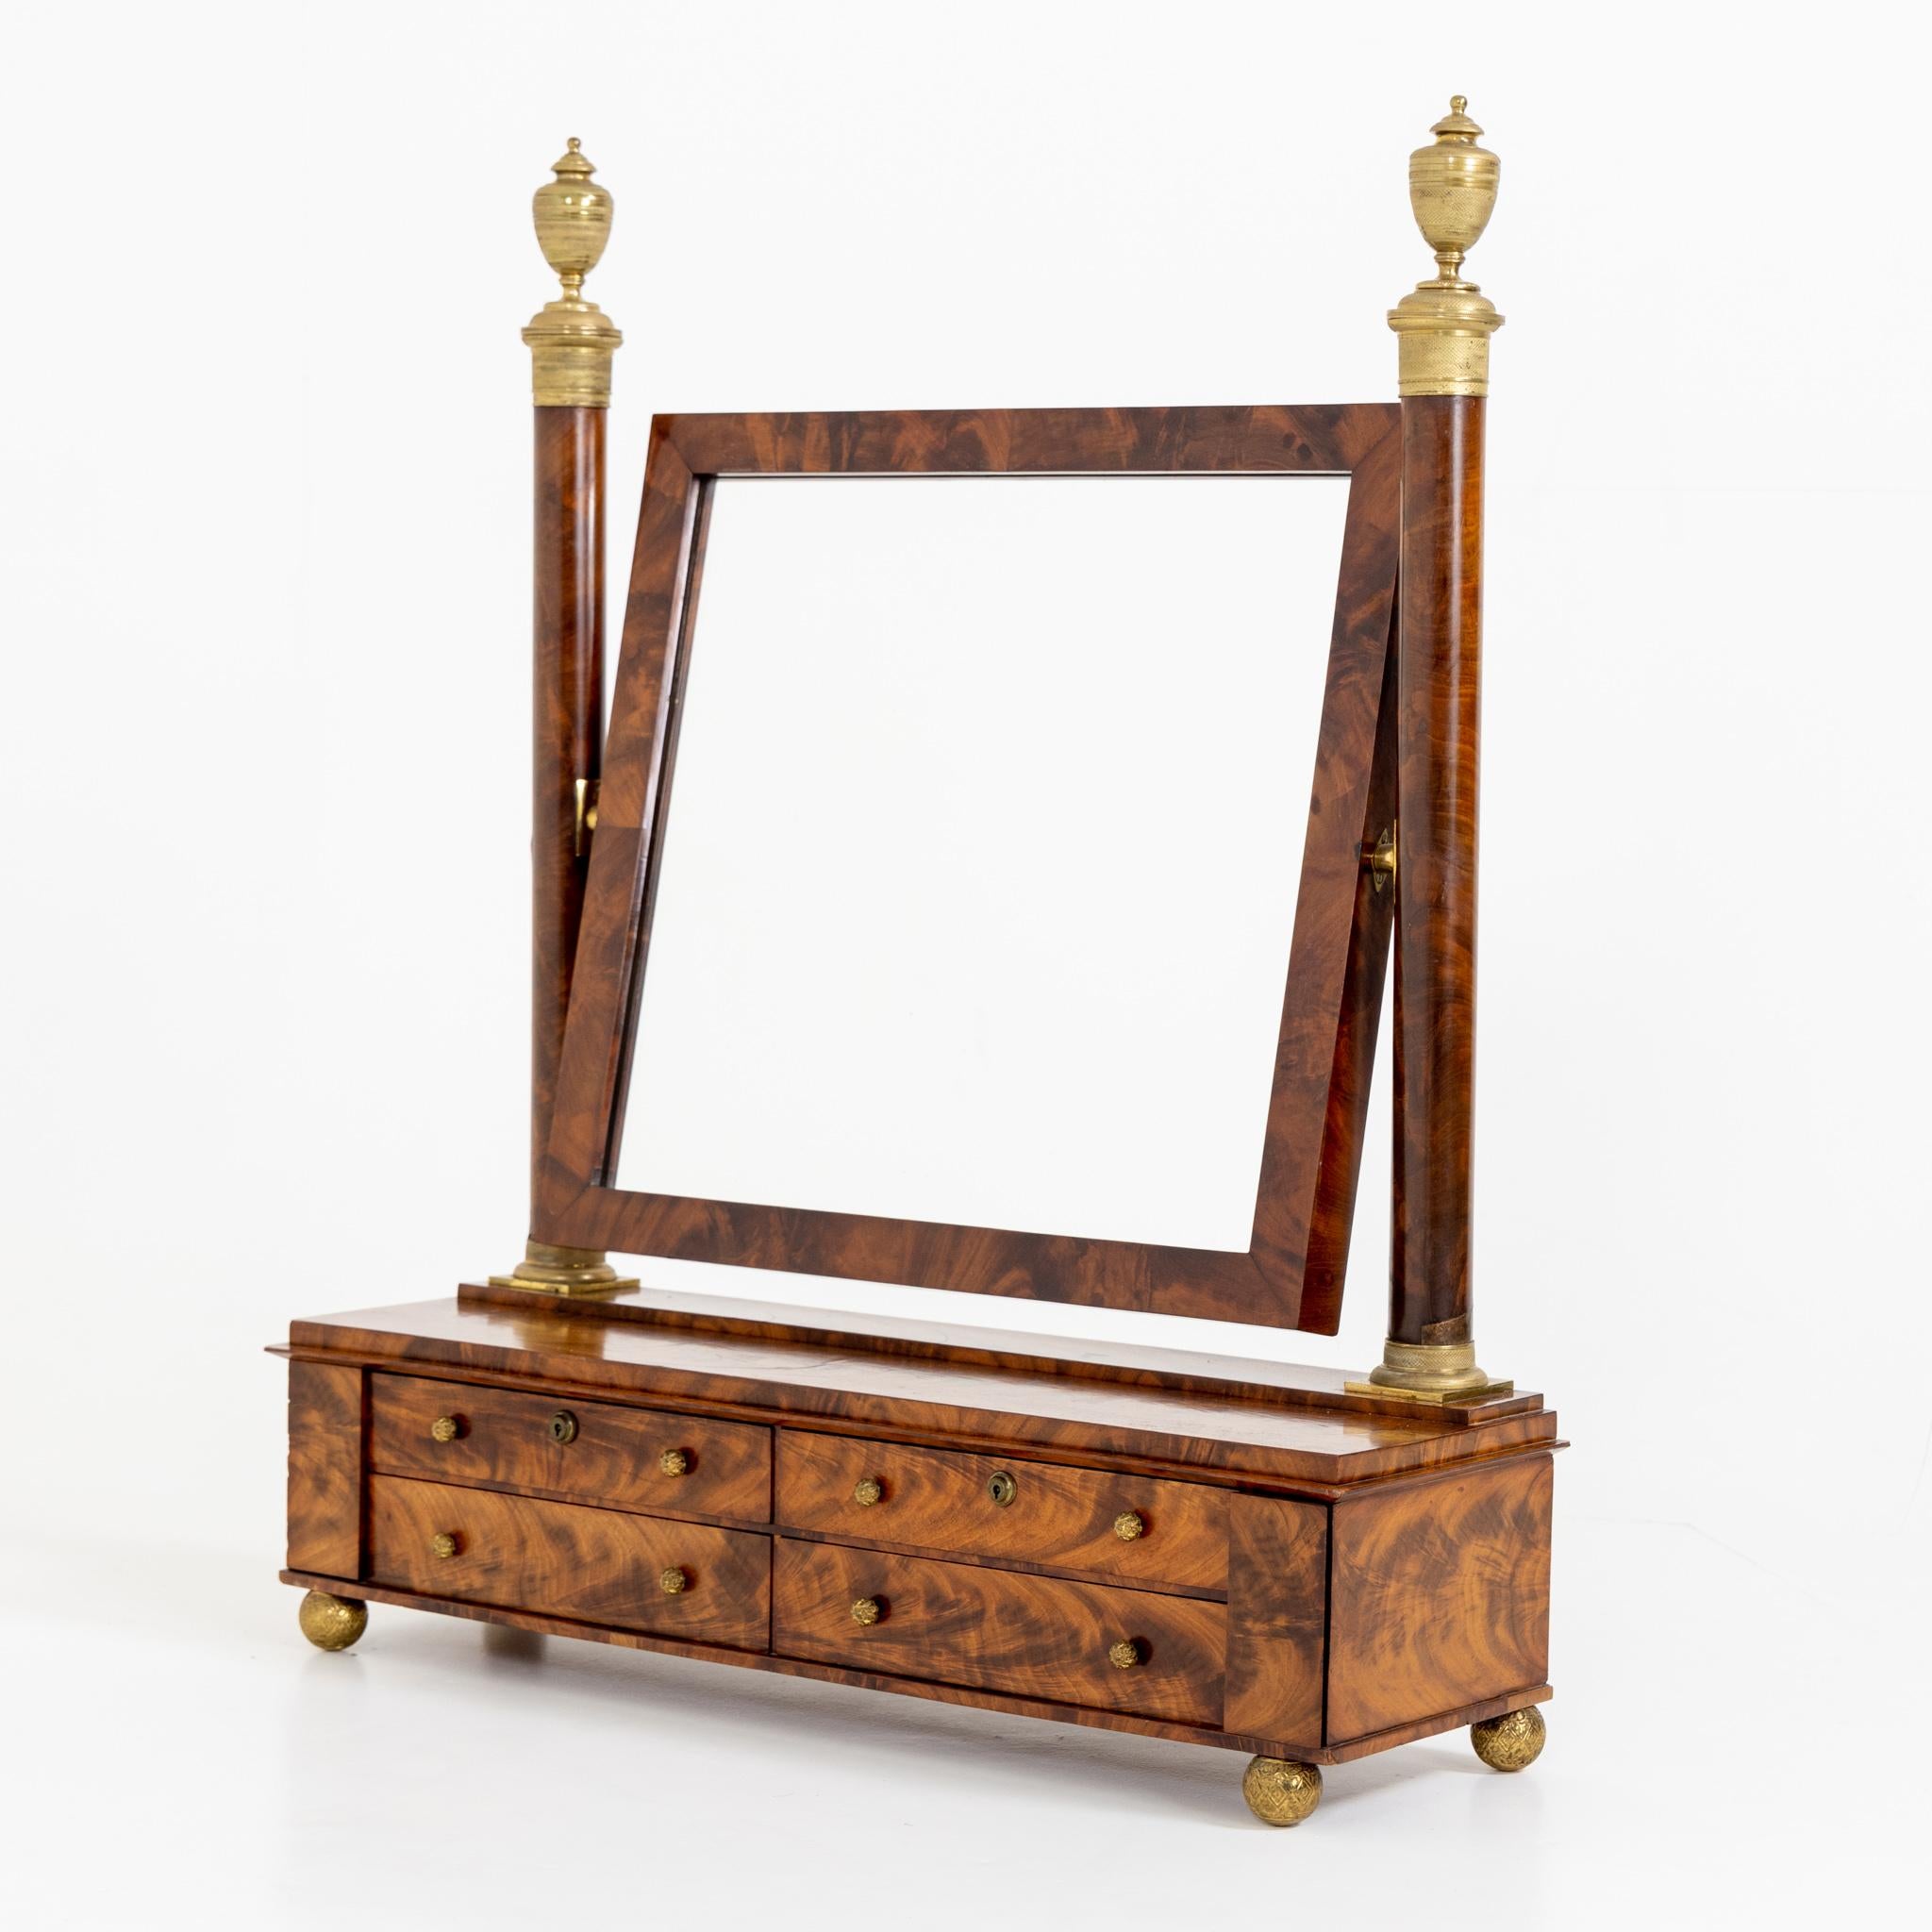 Table mirror in mahogany on oak with brass urn-shaped pinnacles and four drawers.